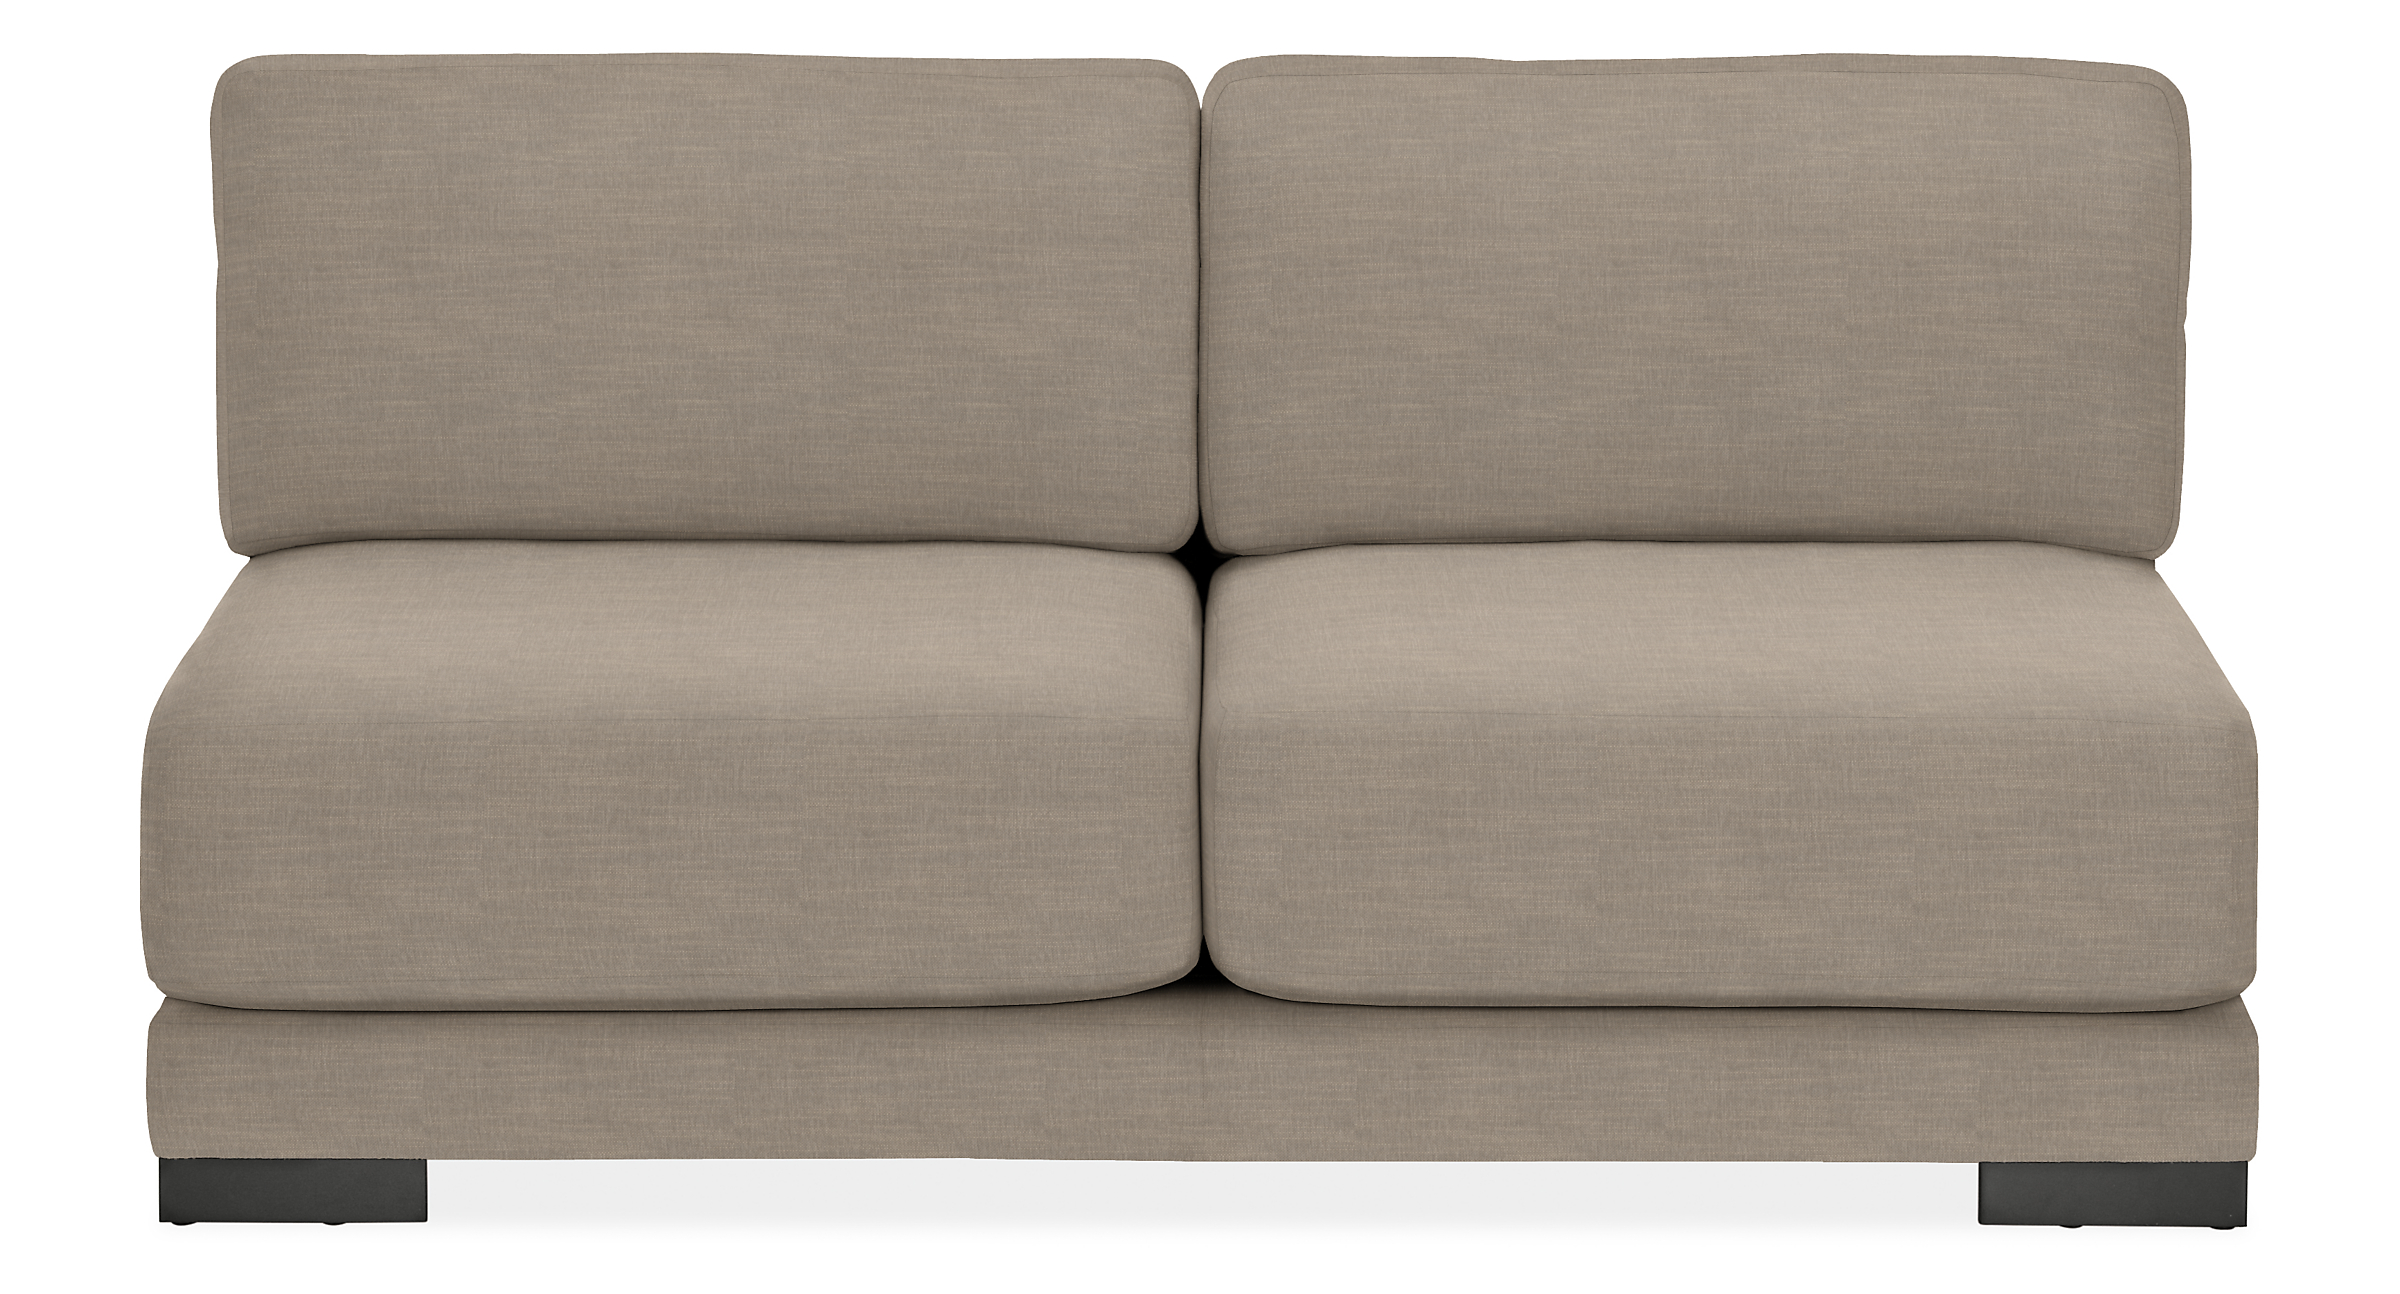 Mira 64" Armless Loveseat in Destin Putty with Charcoal Legs